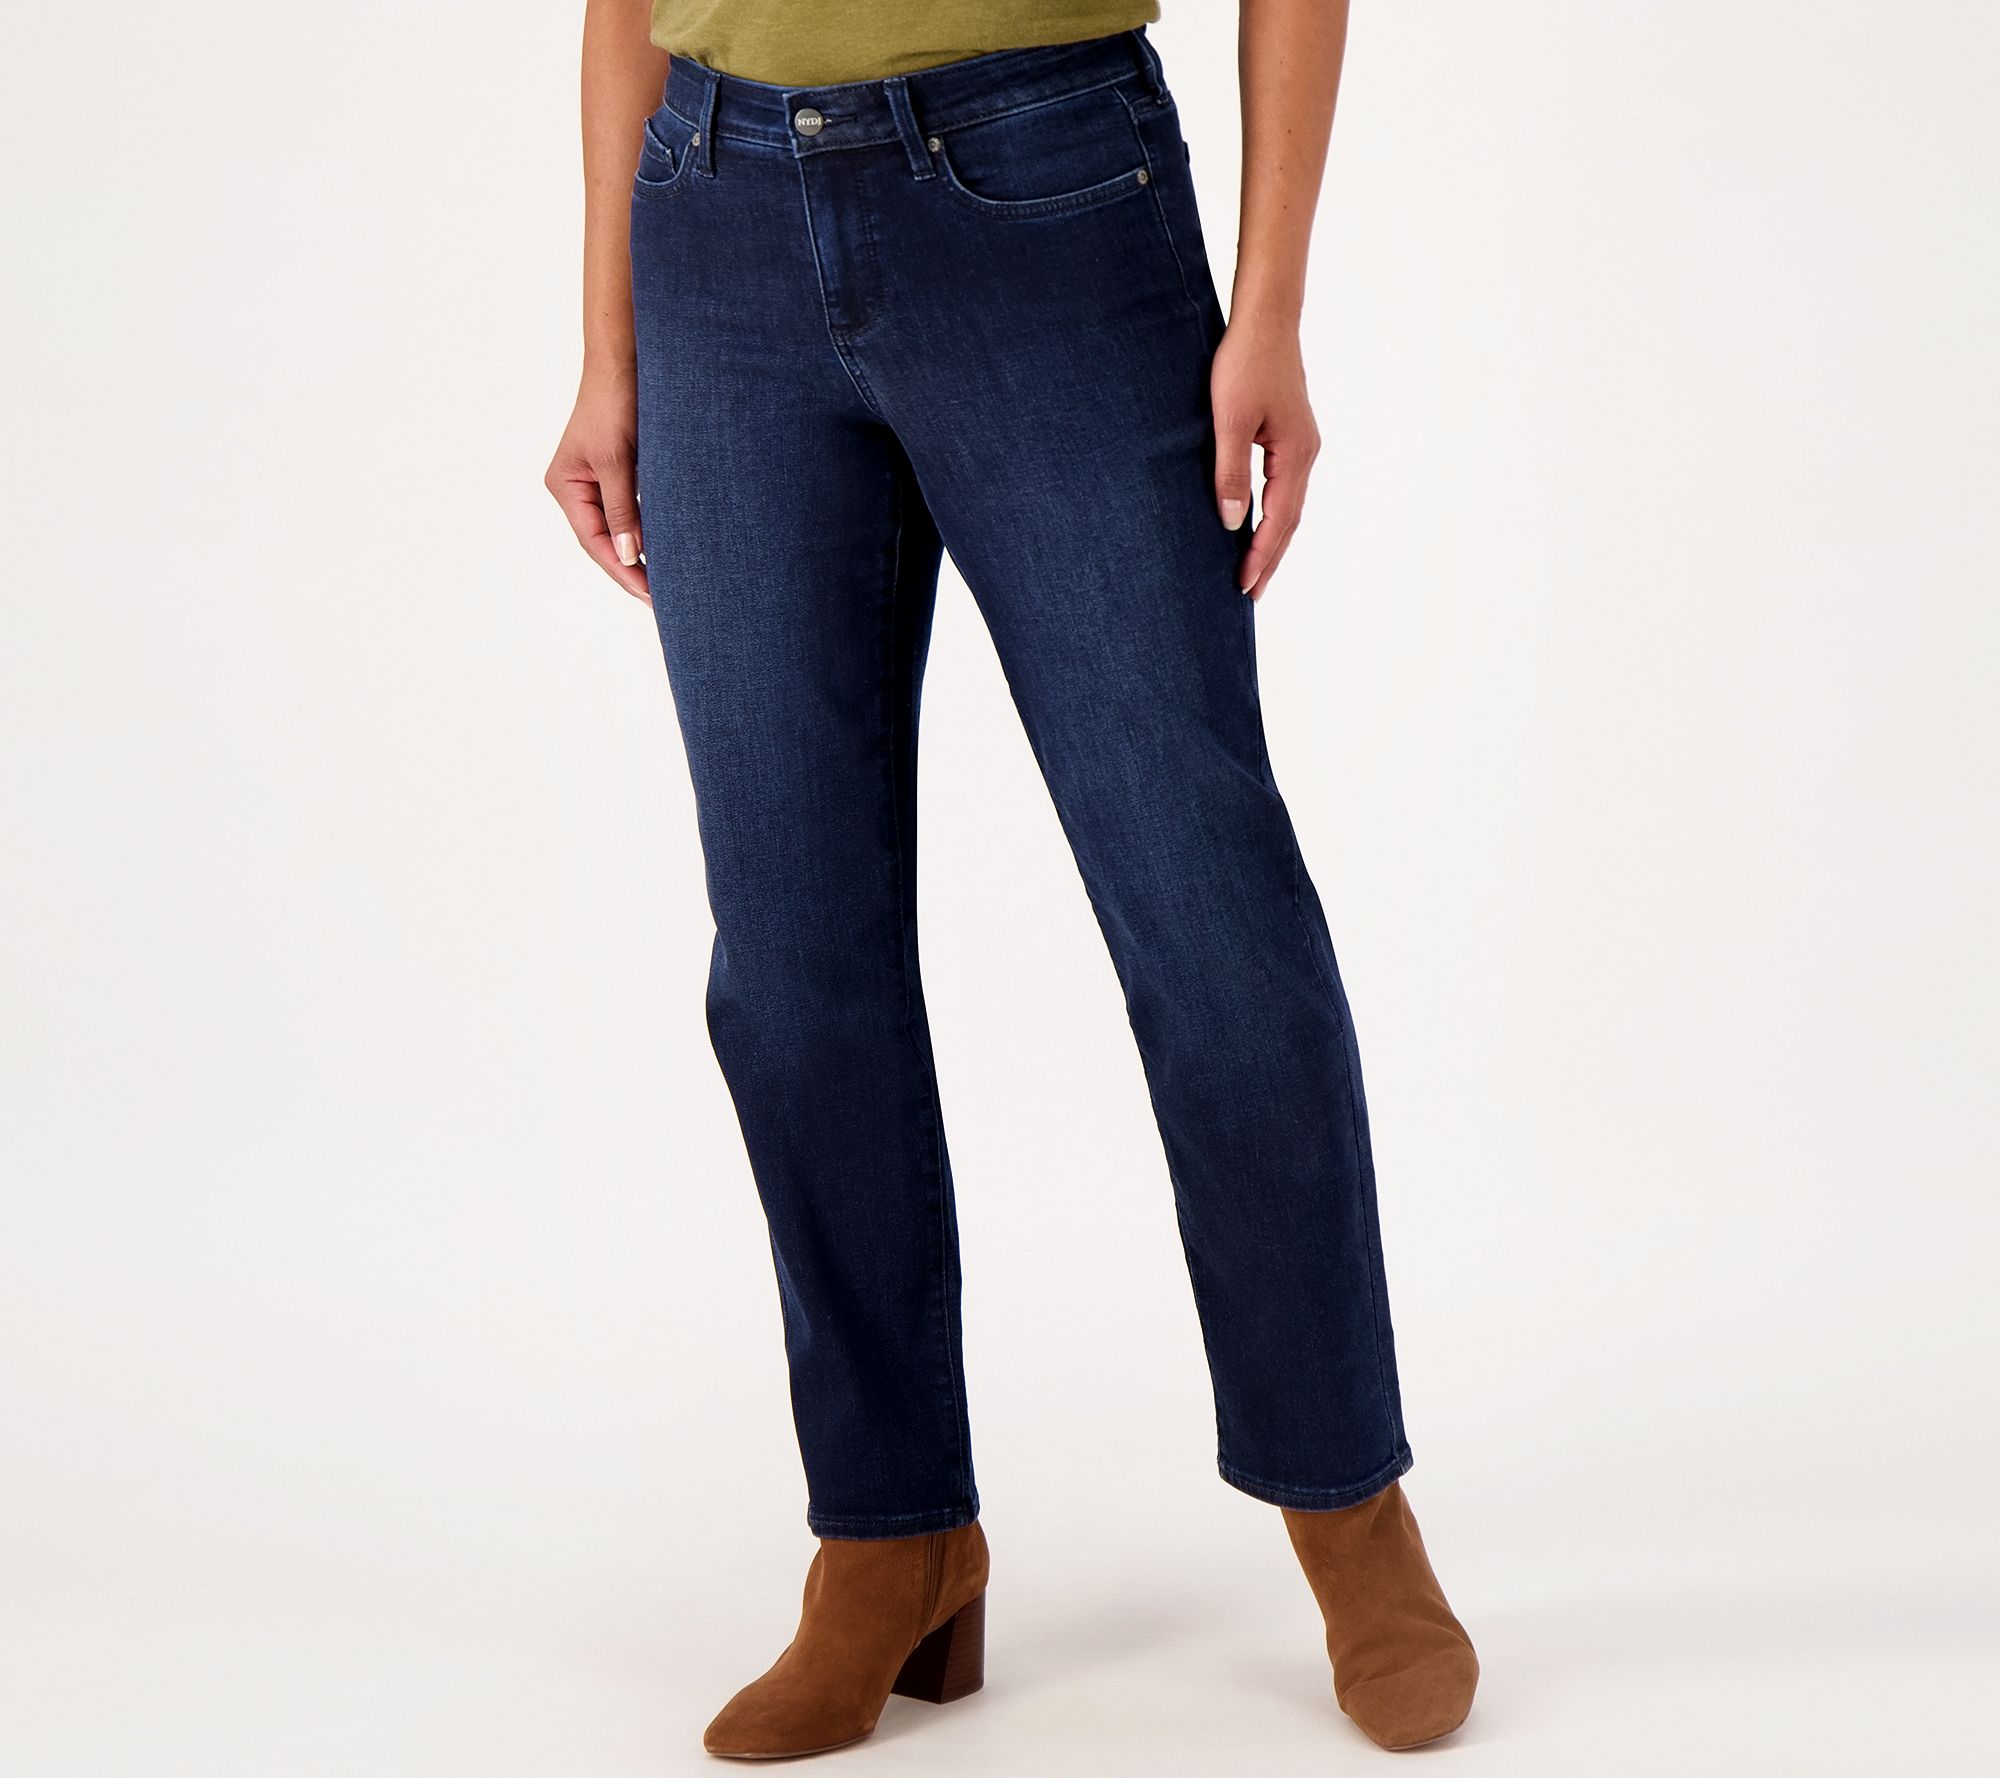 5 Reasons Your Next Pair Of Jeans Should Come From NYDJ